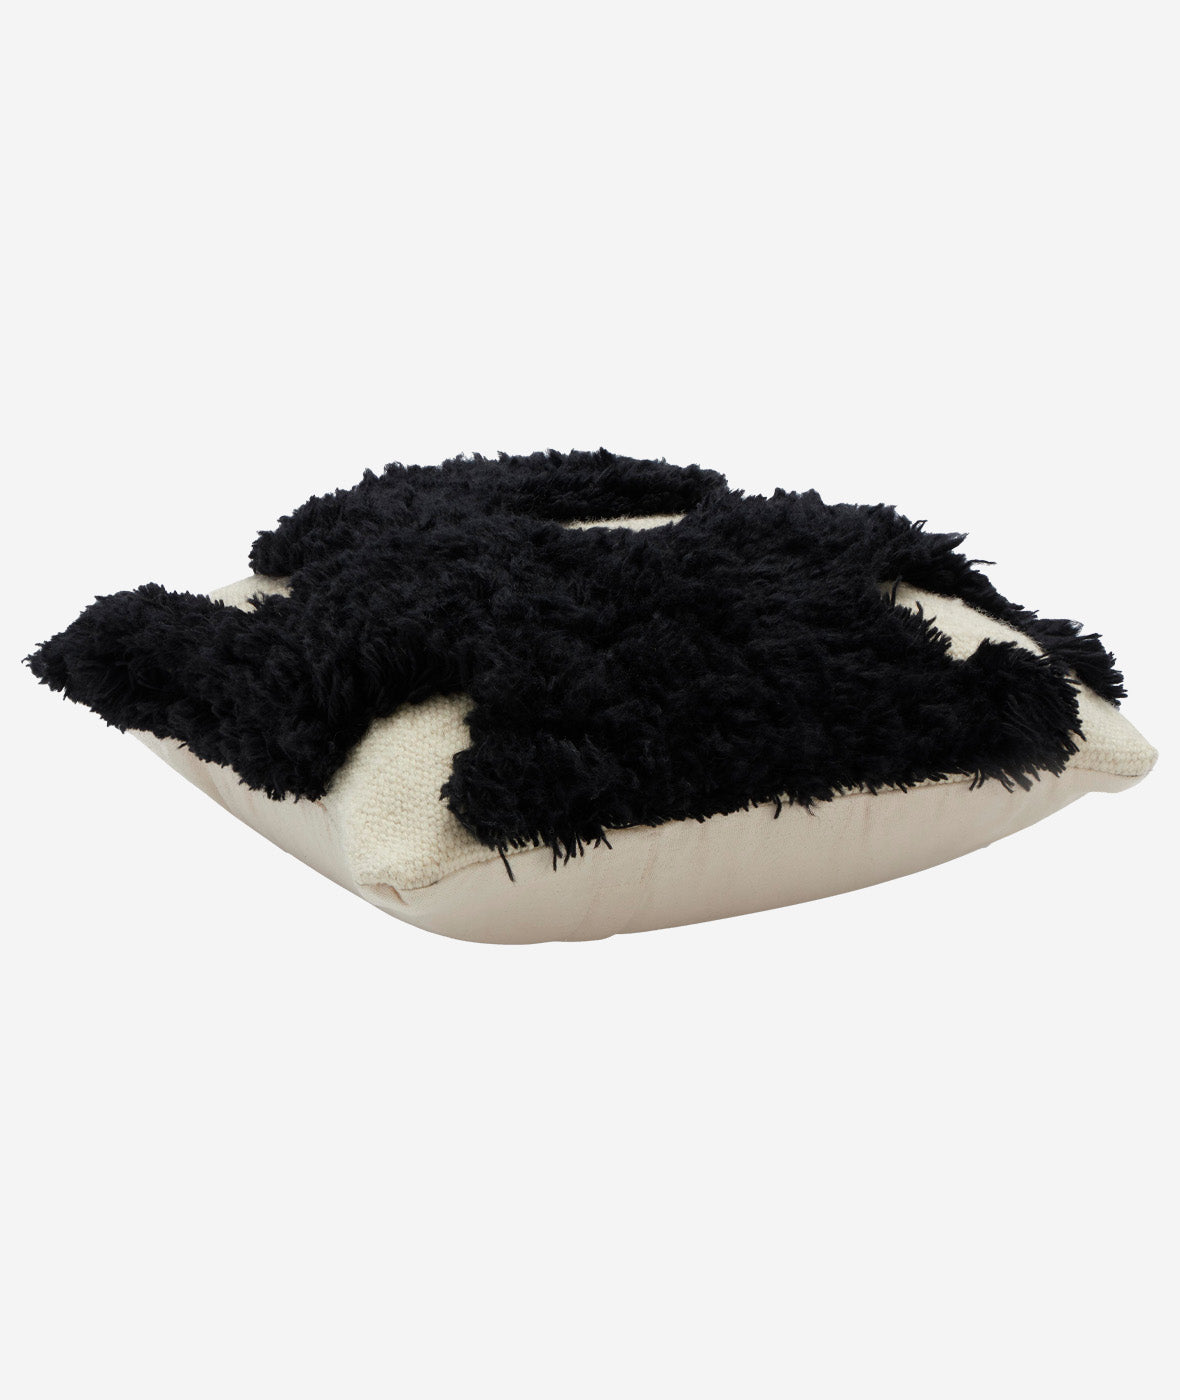 The Wooly Pillow - More Options